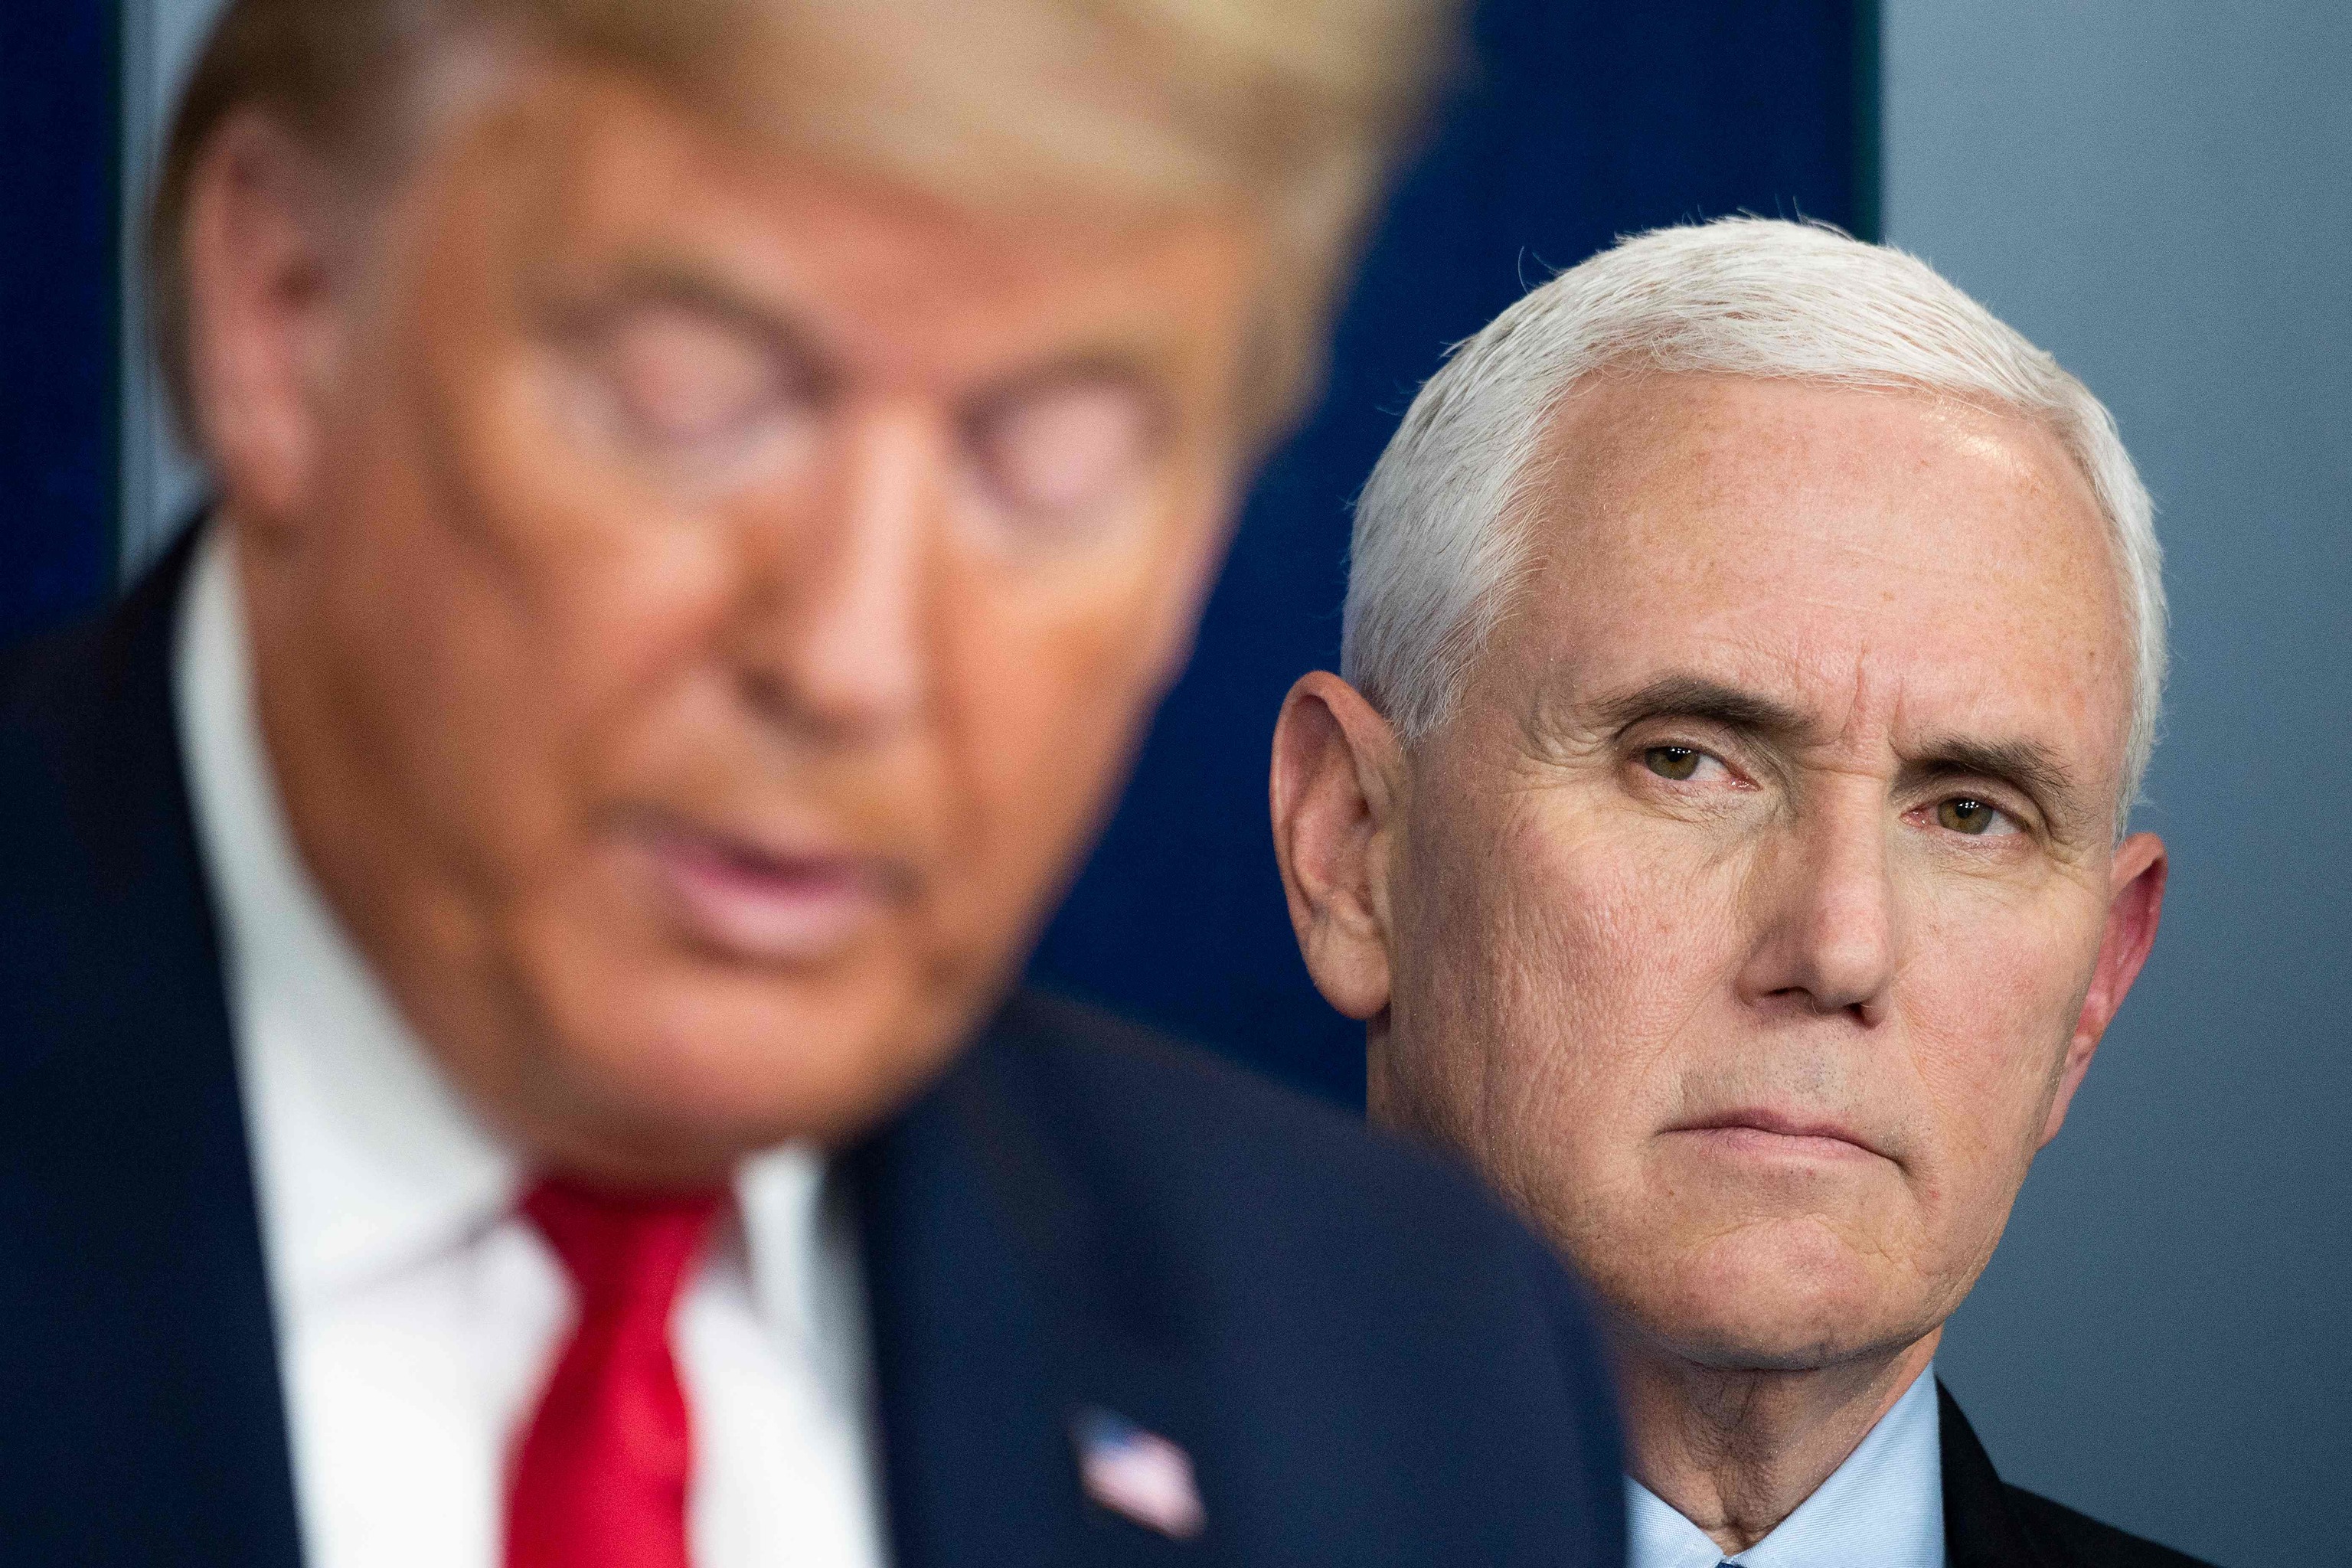 (FILES) US Vice President  lt;HIT gt;Mike lt;/HIT gt;  lt;HIT gt;Pence lt;/HIT gt; listens as US President Donald Trump speaks during a press briefing at the White House in Washington, DC, on March 26, 2020. Former US vice president  lt;HIT gt;Mike lt;/HIT gt;  lt;HIT gt;Pence lt;/HIT gt; said March 15, he would not be endorsing Donald Trump as his old boss runs for a second term in the White House. "It should come as no surprise that I will not be endorsing Donald Trump this year,"  lt;HIT gt;Pence Mike Pence observa a Trump durante una rueda de prensa en la Casa Blanca en marzo de 2020.